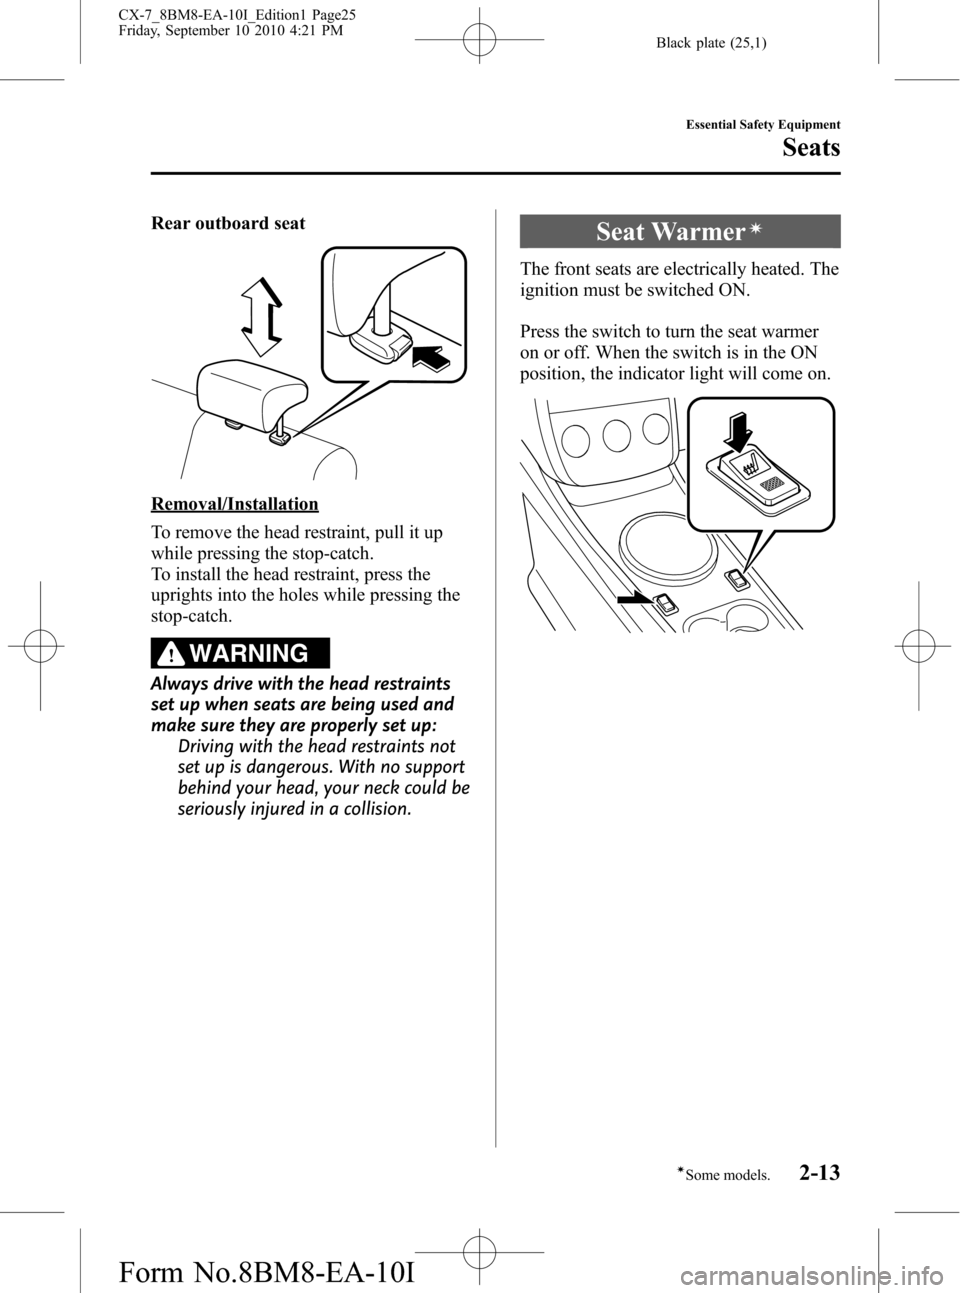 MAZDA MODEL CX-7 2011  Owners Manual (in English) Black plate (25,1)
Rear outboard seat
Removal/Installation
To remove the head restraint, pull it up
while pressing the stop-catch.
To install the head restraint, press the
uprights into the holes whil